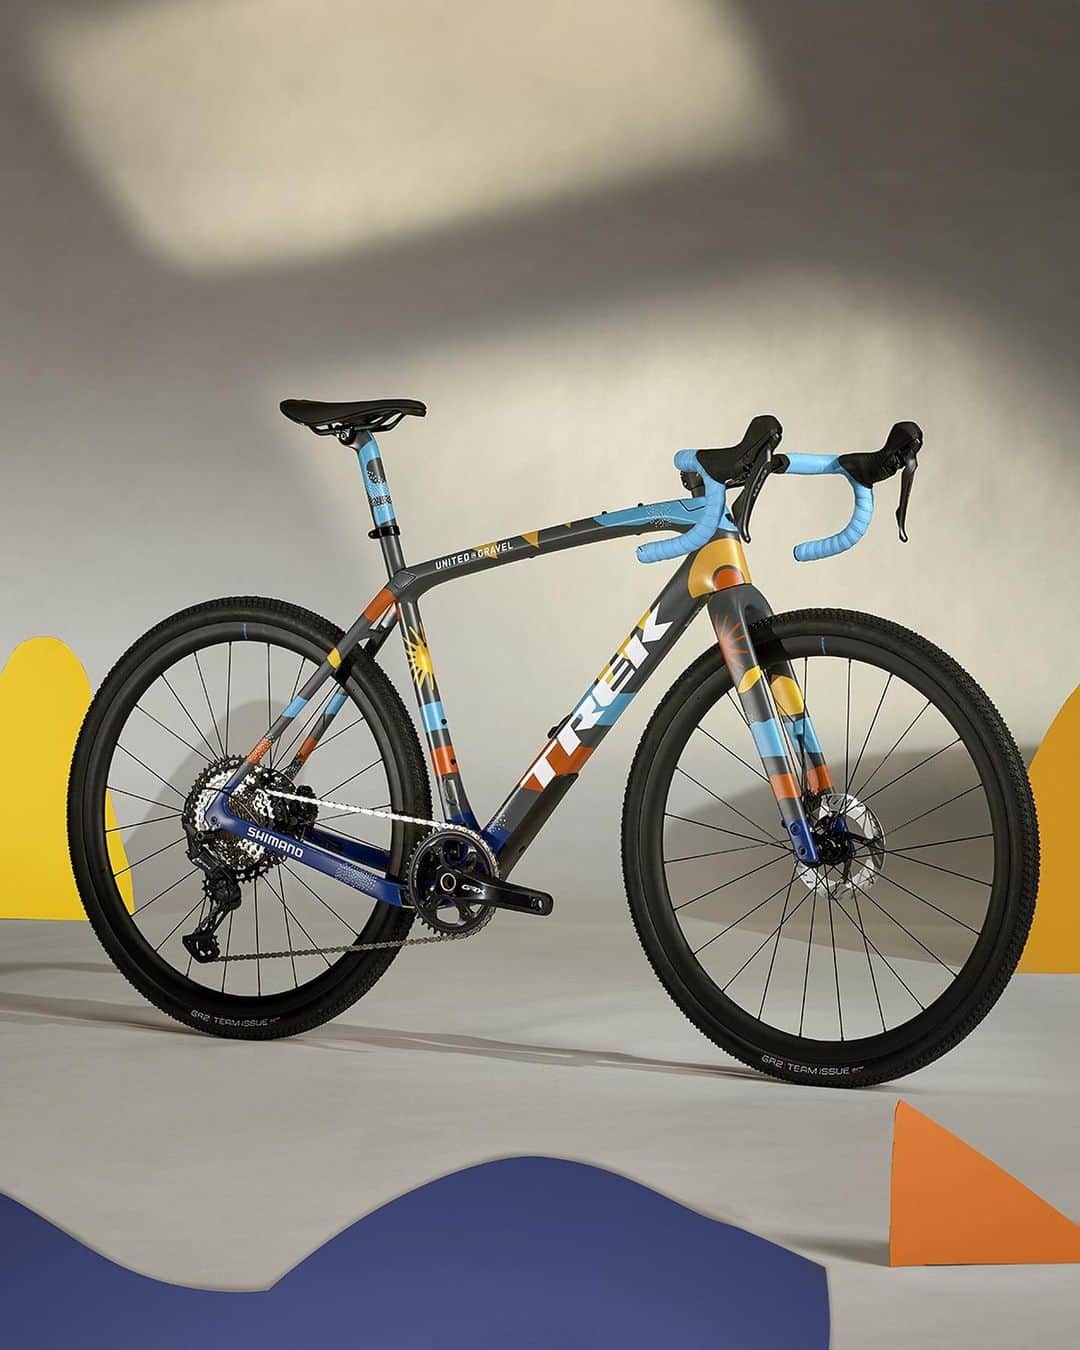 Shimanoのインスタグラム：「What happens when Project One artists team up with our friends at Shimano? Pure unity 🤝  The Shimano x Trek United in Gravel Checkpoint SLR blends abstract graphics and colors with a do-anything bike to tell a story of all who ride gravel – no matter where we come from. With shapes symbolizing the mountains we climb and rivers we forge – and Shimano’s new GRX 12-speed groupset, this one-of-one ride is ready to roll anywhere 🌎  Want to learn more about this collaboration? Head to the link in bio🔗 to learn more about the inspiration  #TrekBikes #RideShimano #TrekCheckpoint #UnitedinGravel #TrekProjectOne #gravel」